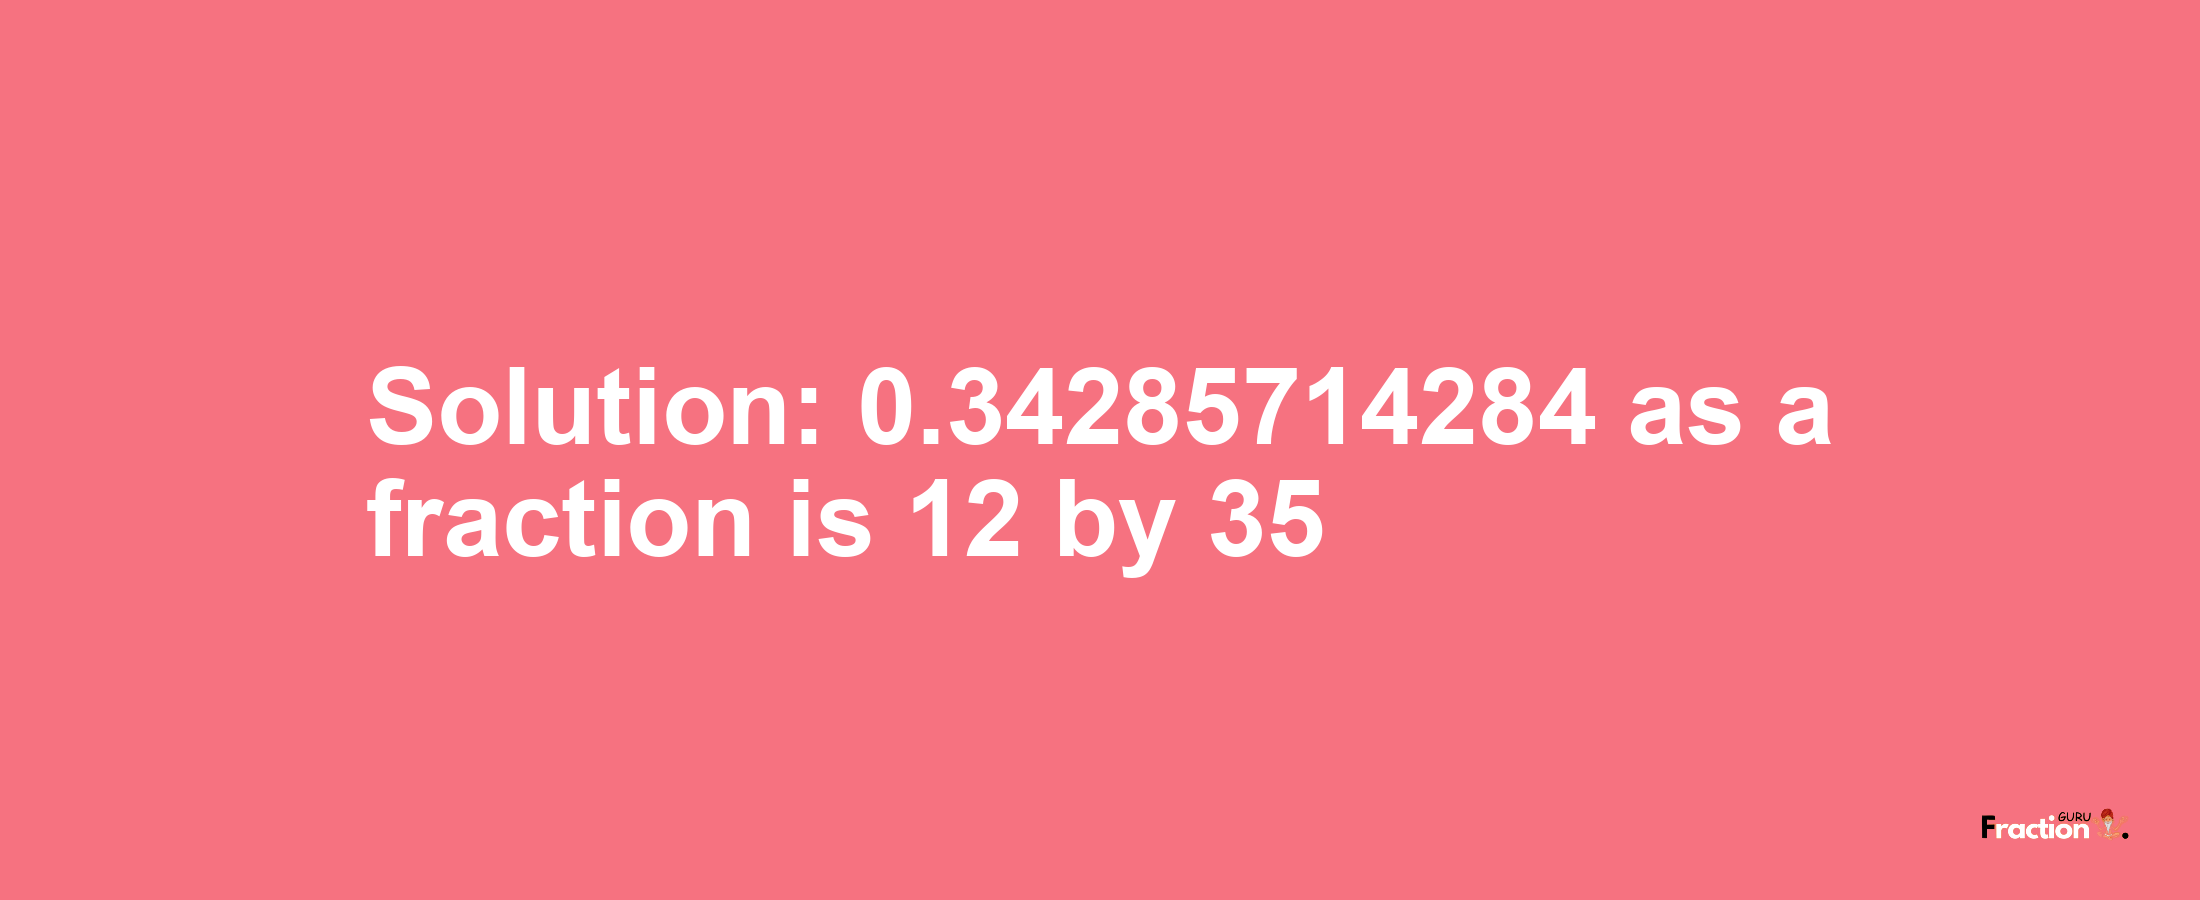 Solution:0.34285714284 as a fraction is 12/35